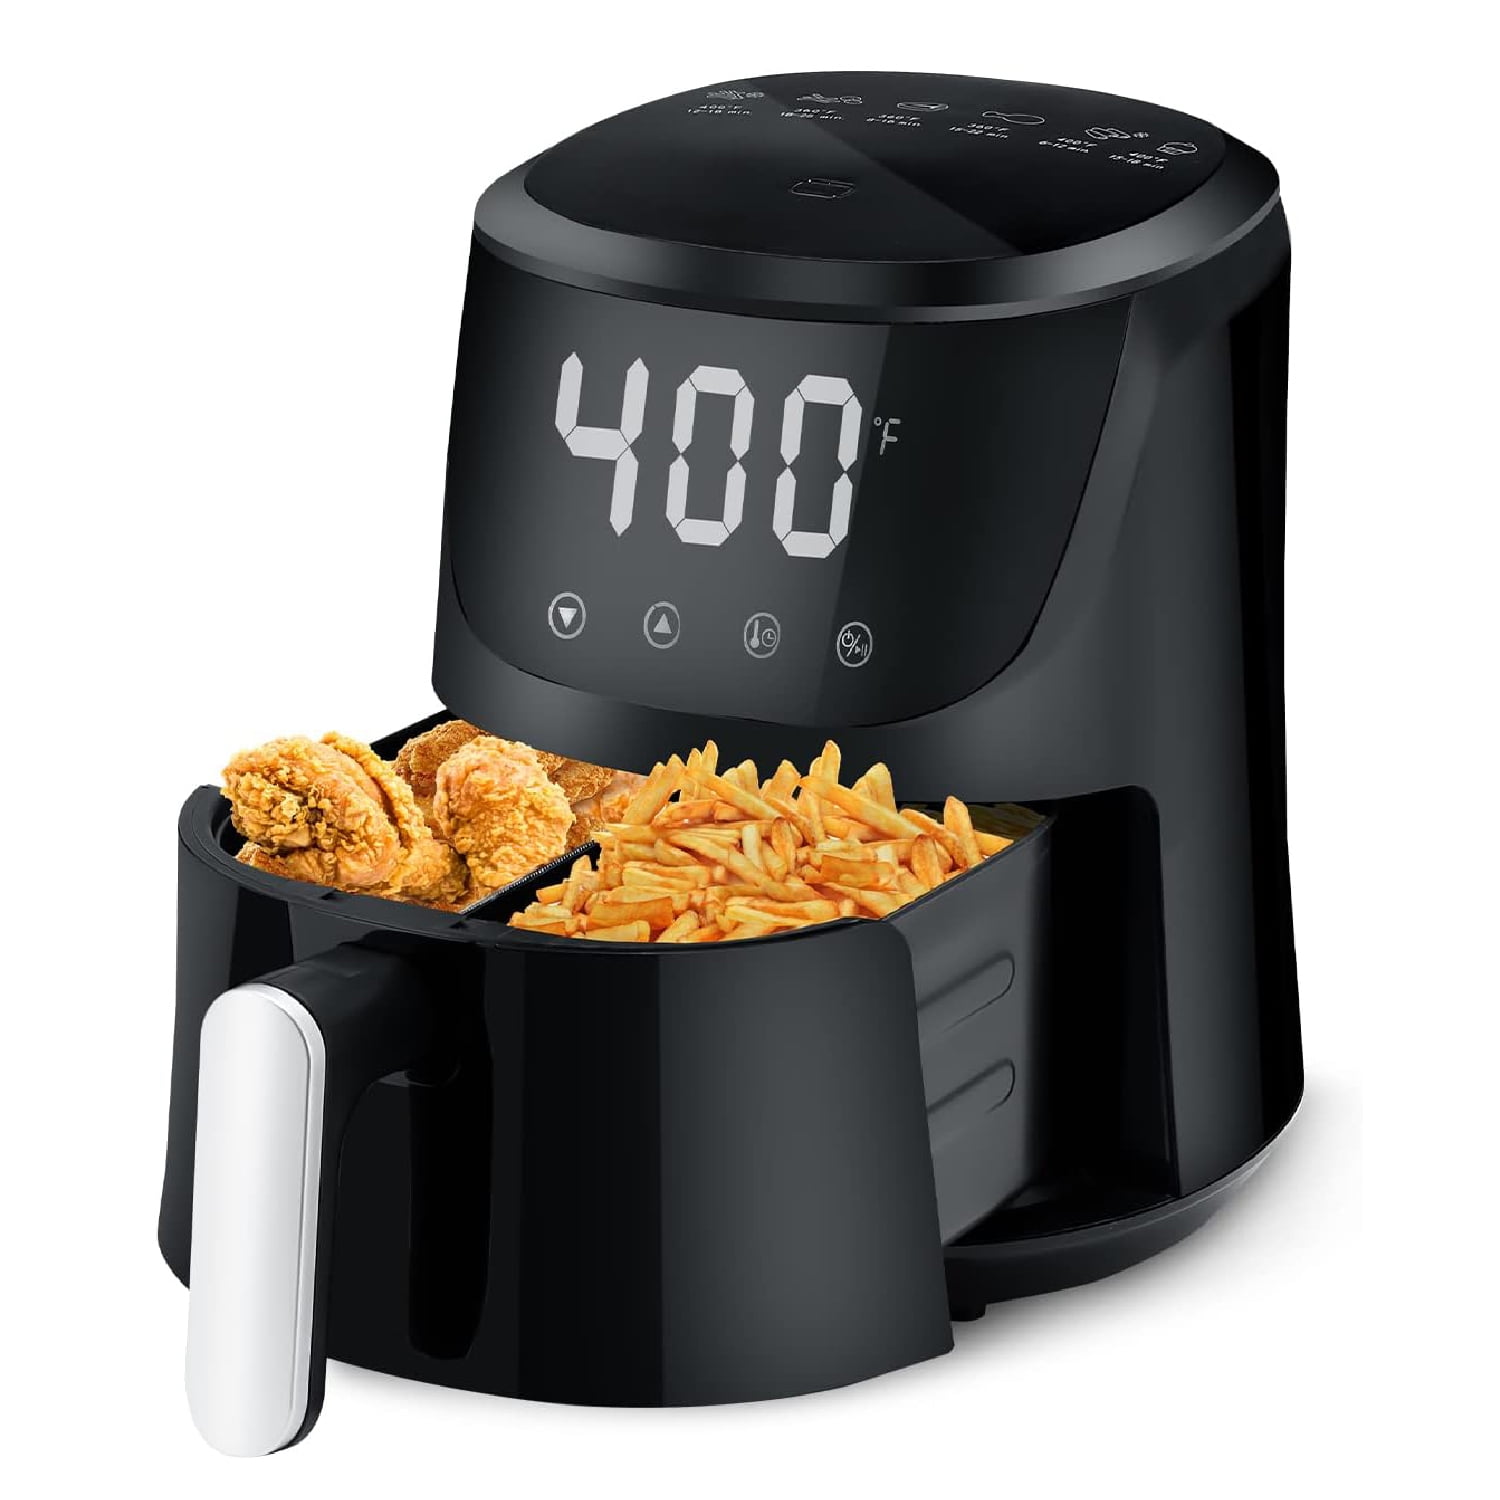  CHEFMAN Small Air Fryer Healthy Cooking, 3.7 Qt, Nonstick, User  Friendly and Digital Touch Screen, w/ 60 Minute Timer & Auto Shutoff,  Dishwasher Safe Basket, BPA-Free, Glossy White : Home 